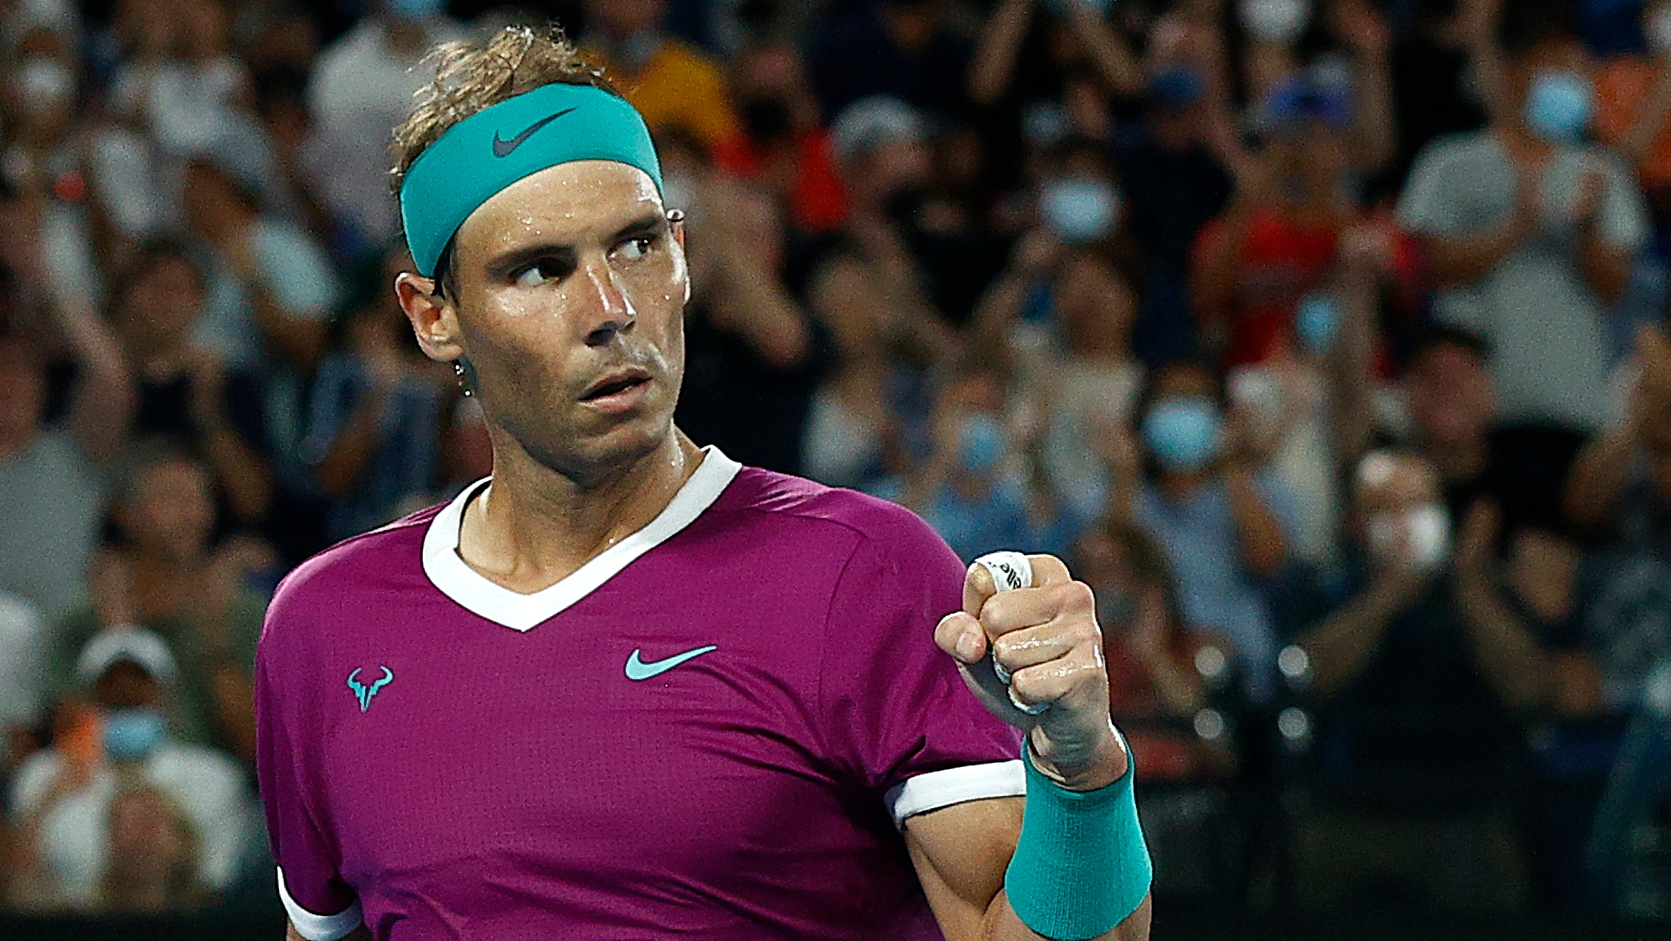 Nadal finishes 40-shot rally with unbelievable shot - Stream the Video